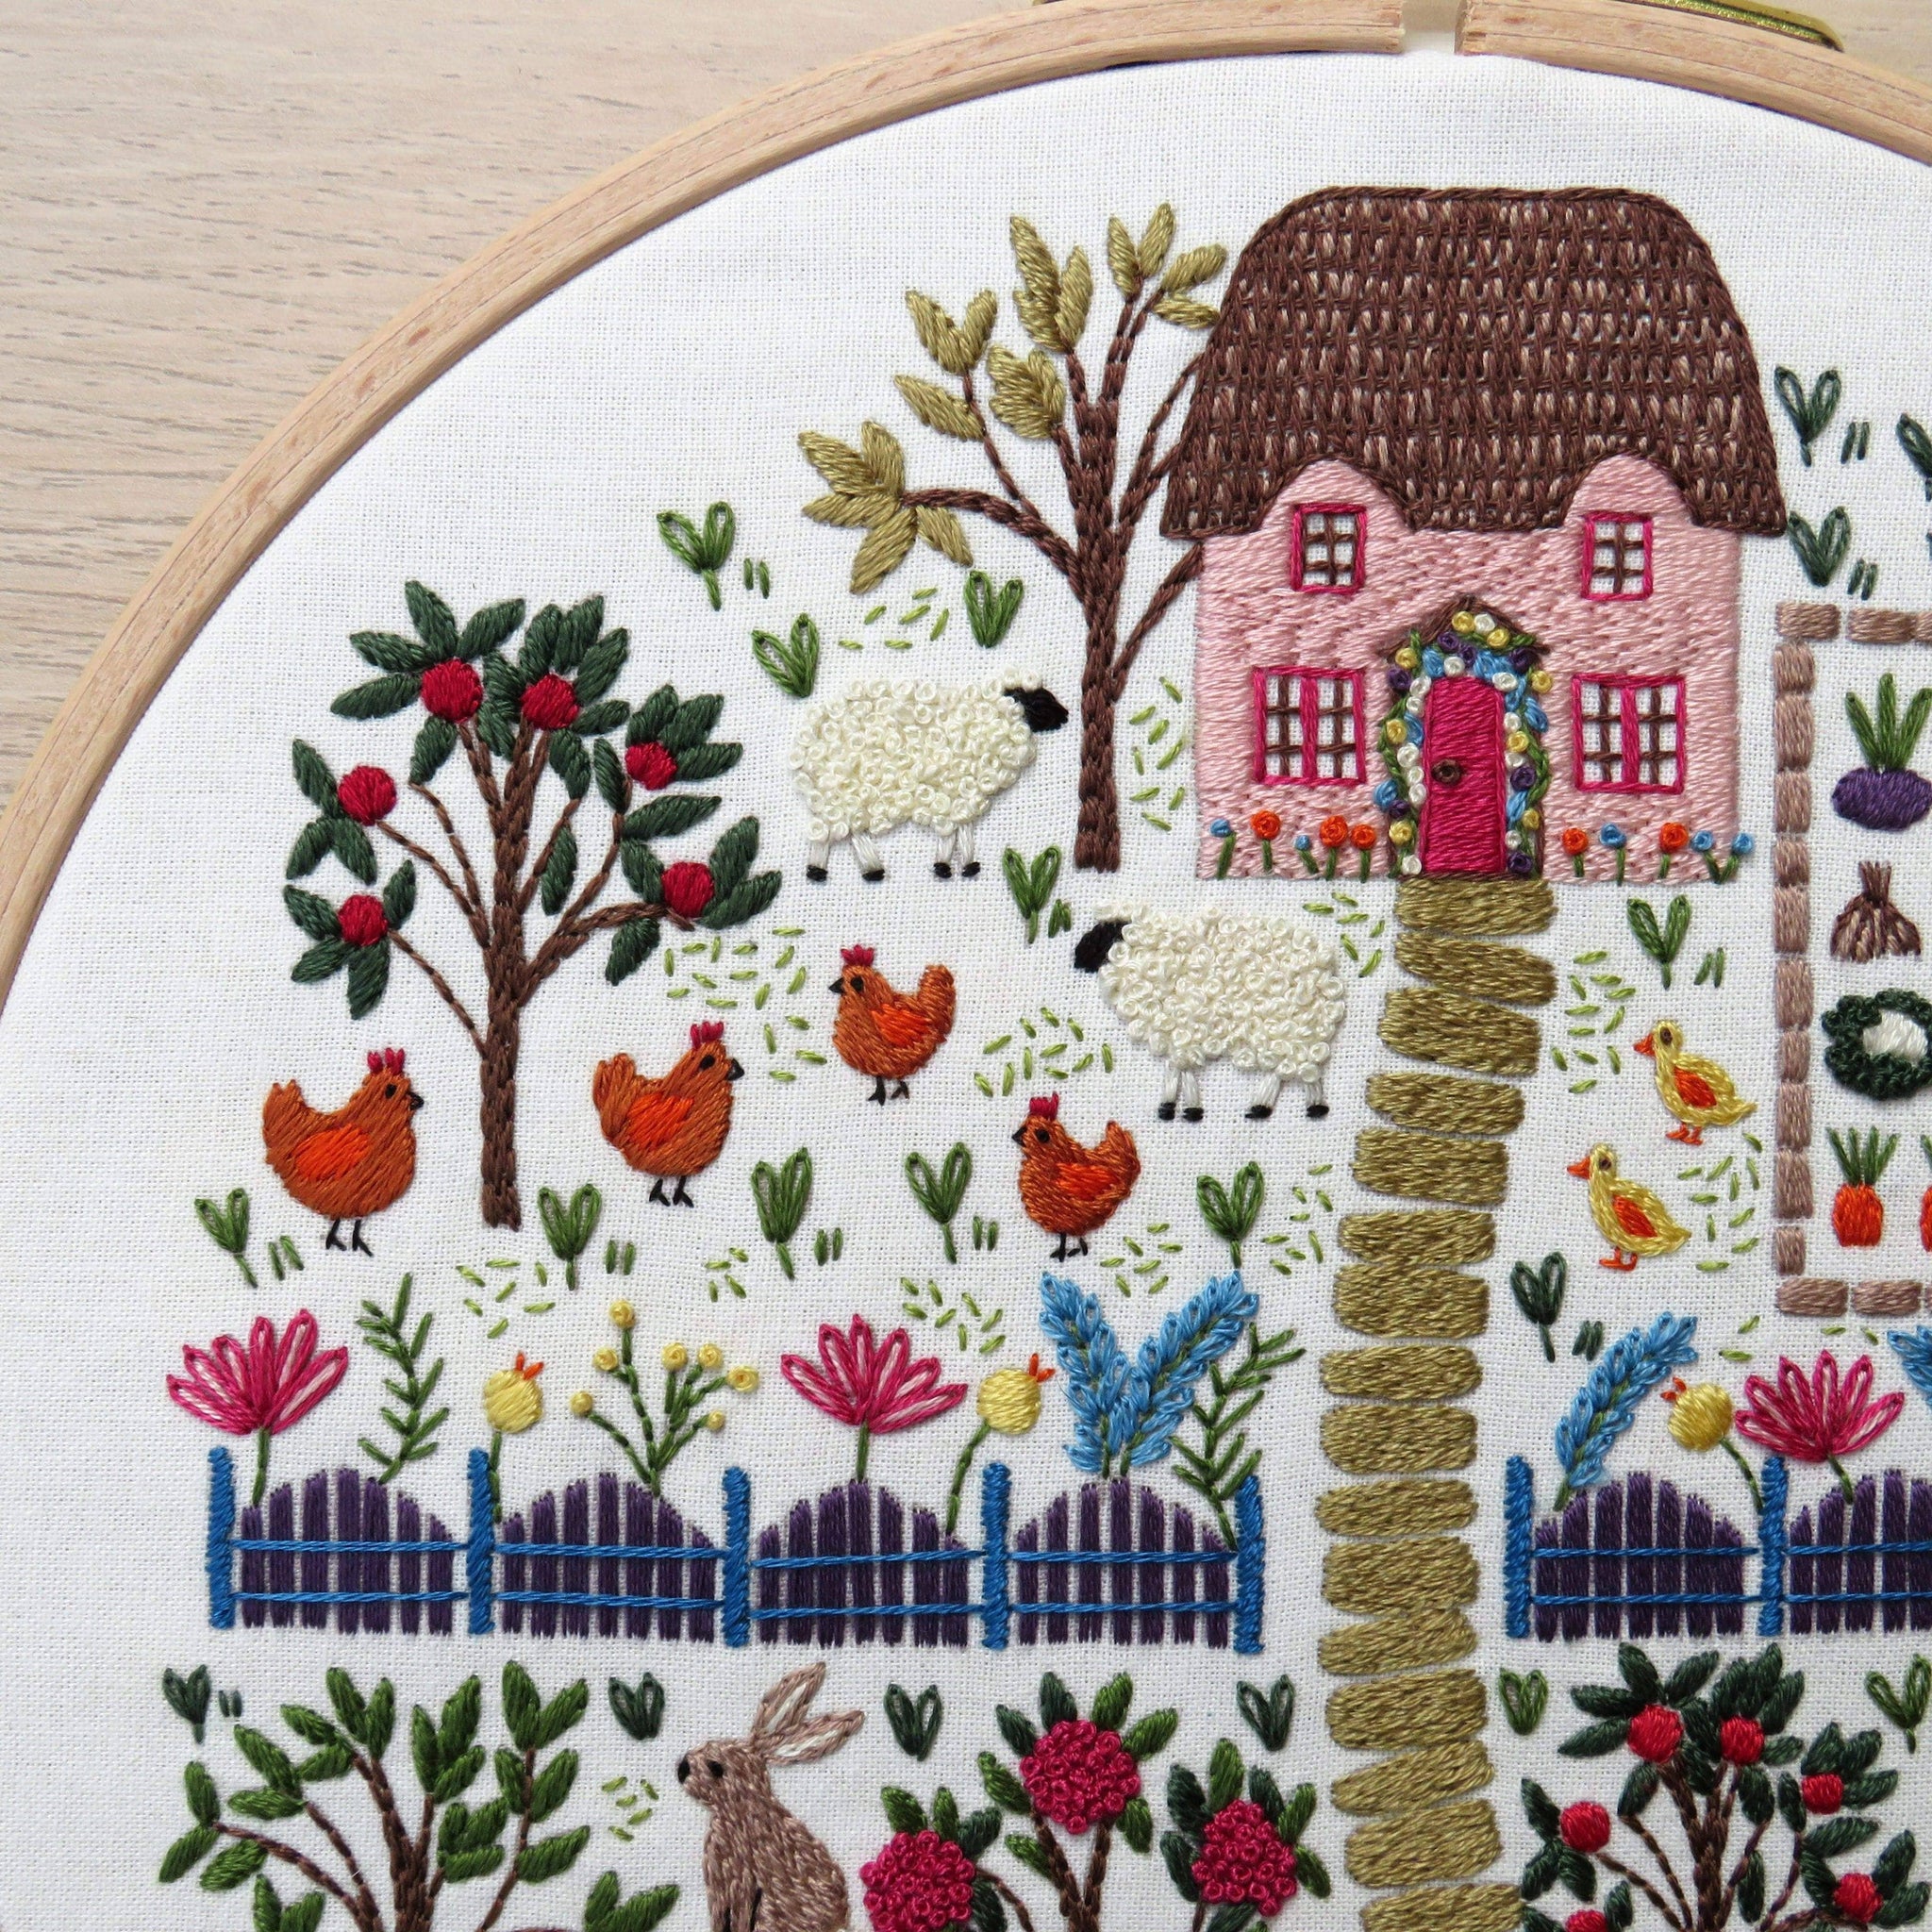 The Homestead, Pre Printed Embroidery Fabric Panel PLUS PDF Pattern , Pre Printed Fabric Pattern , StitchDoodles , bird embroidery, Embroidery, embroidery hoop, embroidery hoop kit, embroidery kits for beginners, embroidery pattern, garden embroidery, hand embroidery, hand embroidery fabric, hand embroidery kit, hand embroidery seat frame, nurge embroidery hoop, PDF pattern, Printed Pattern, unique embroidery kits , StitchDoodles , shop.stitchdoodles.com